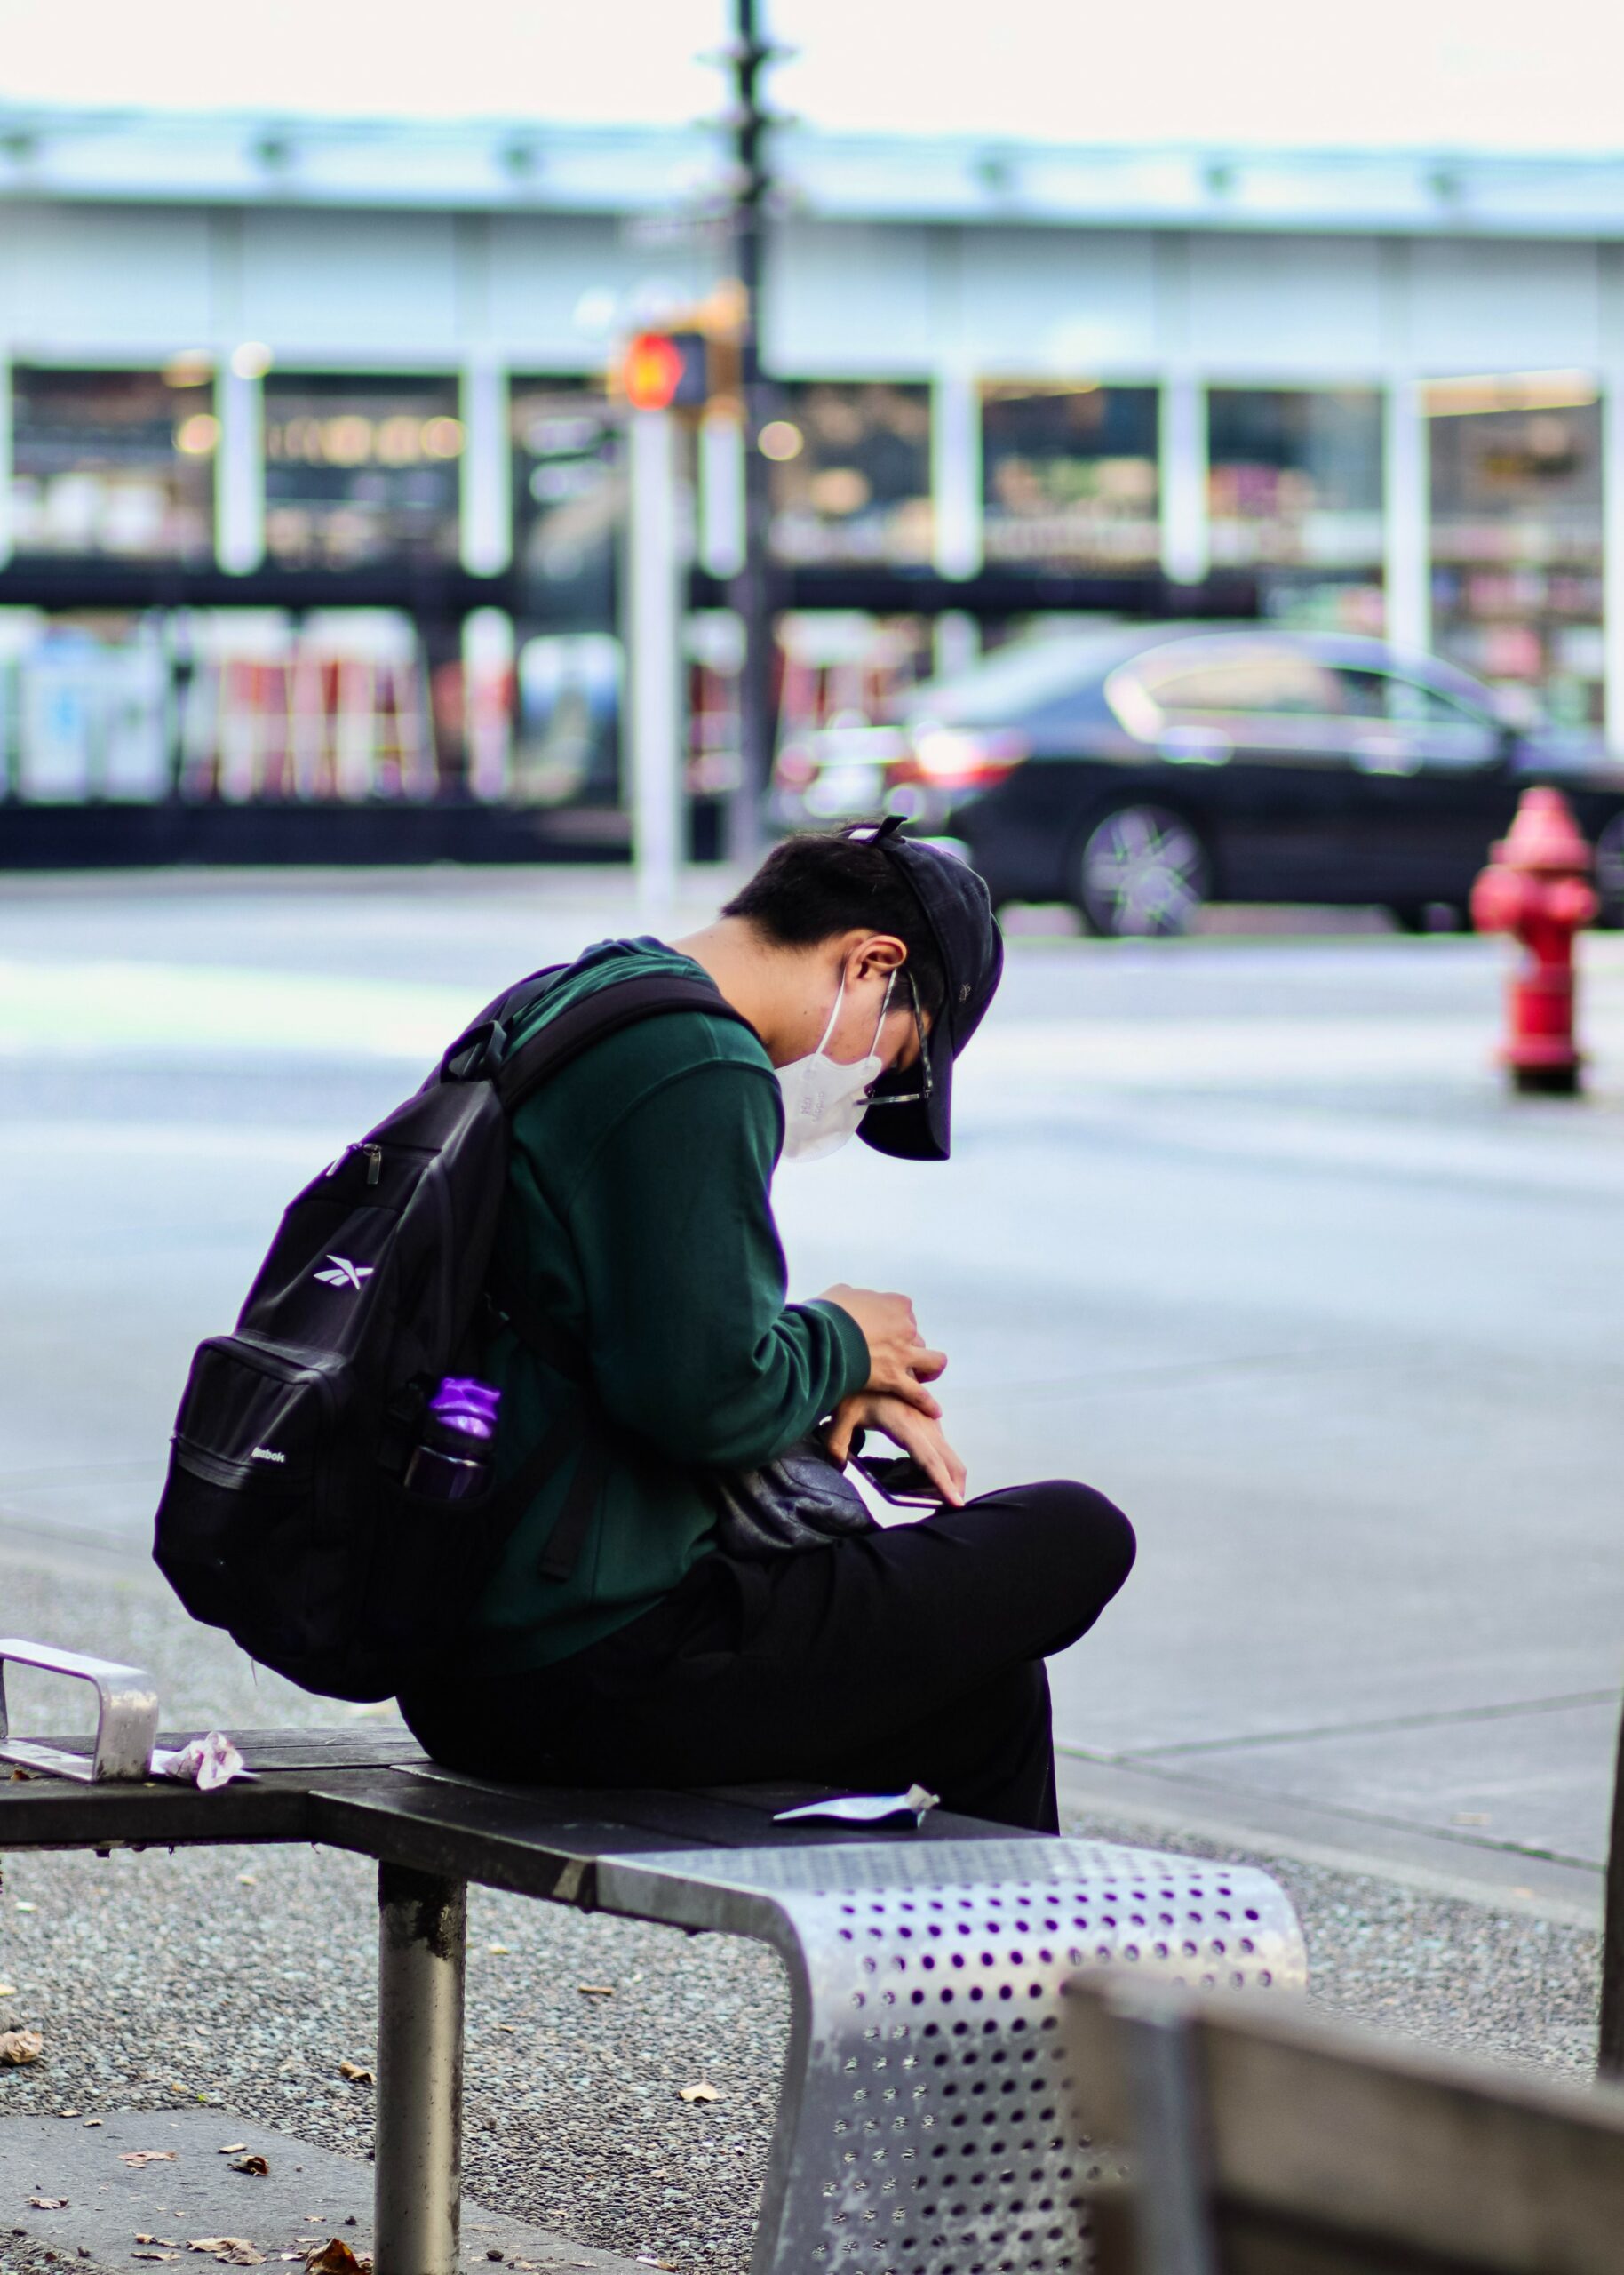 This is a photo of an individual sitting on a bench outside. They are wearing a mask while they look at their phone. They are sitting alone.